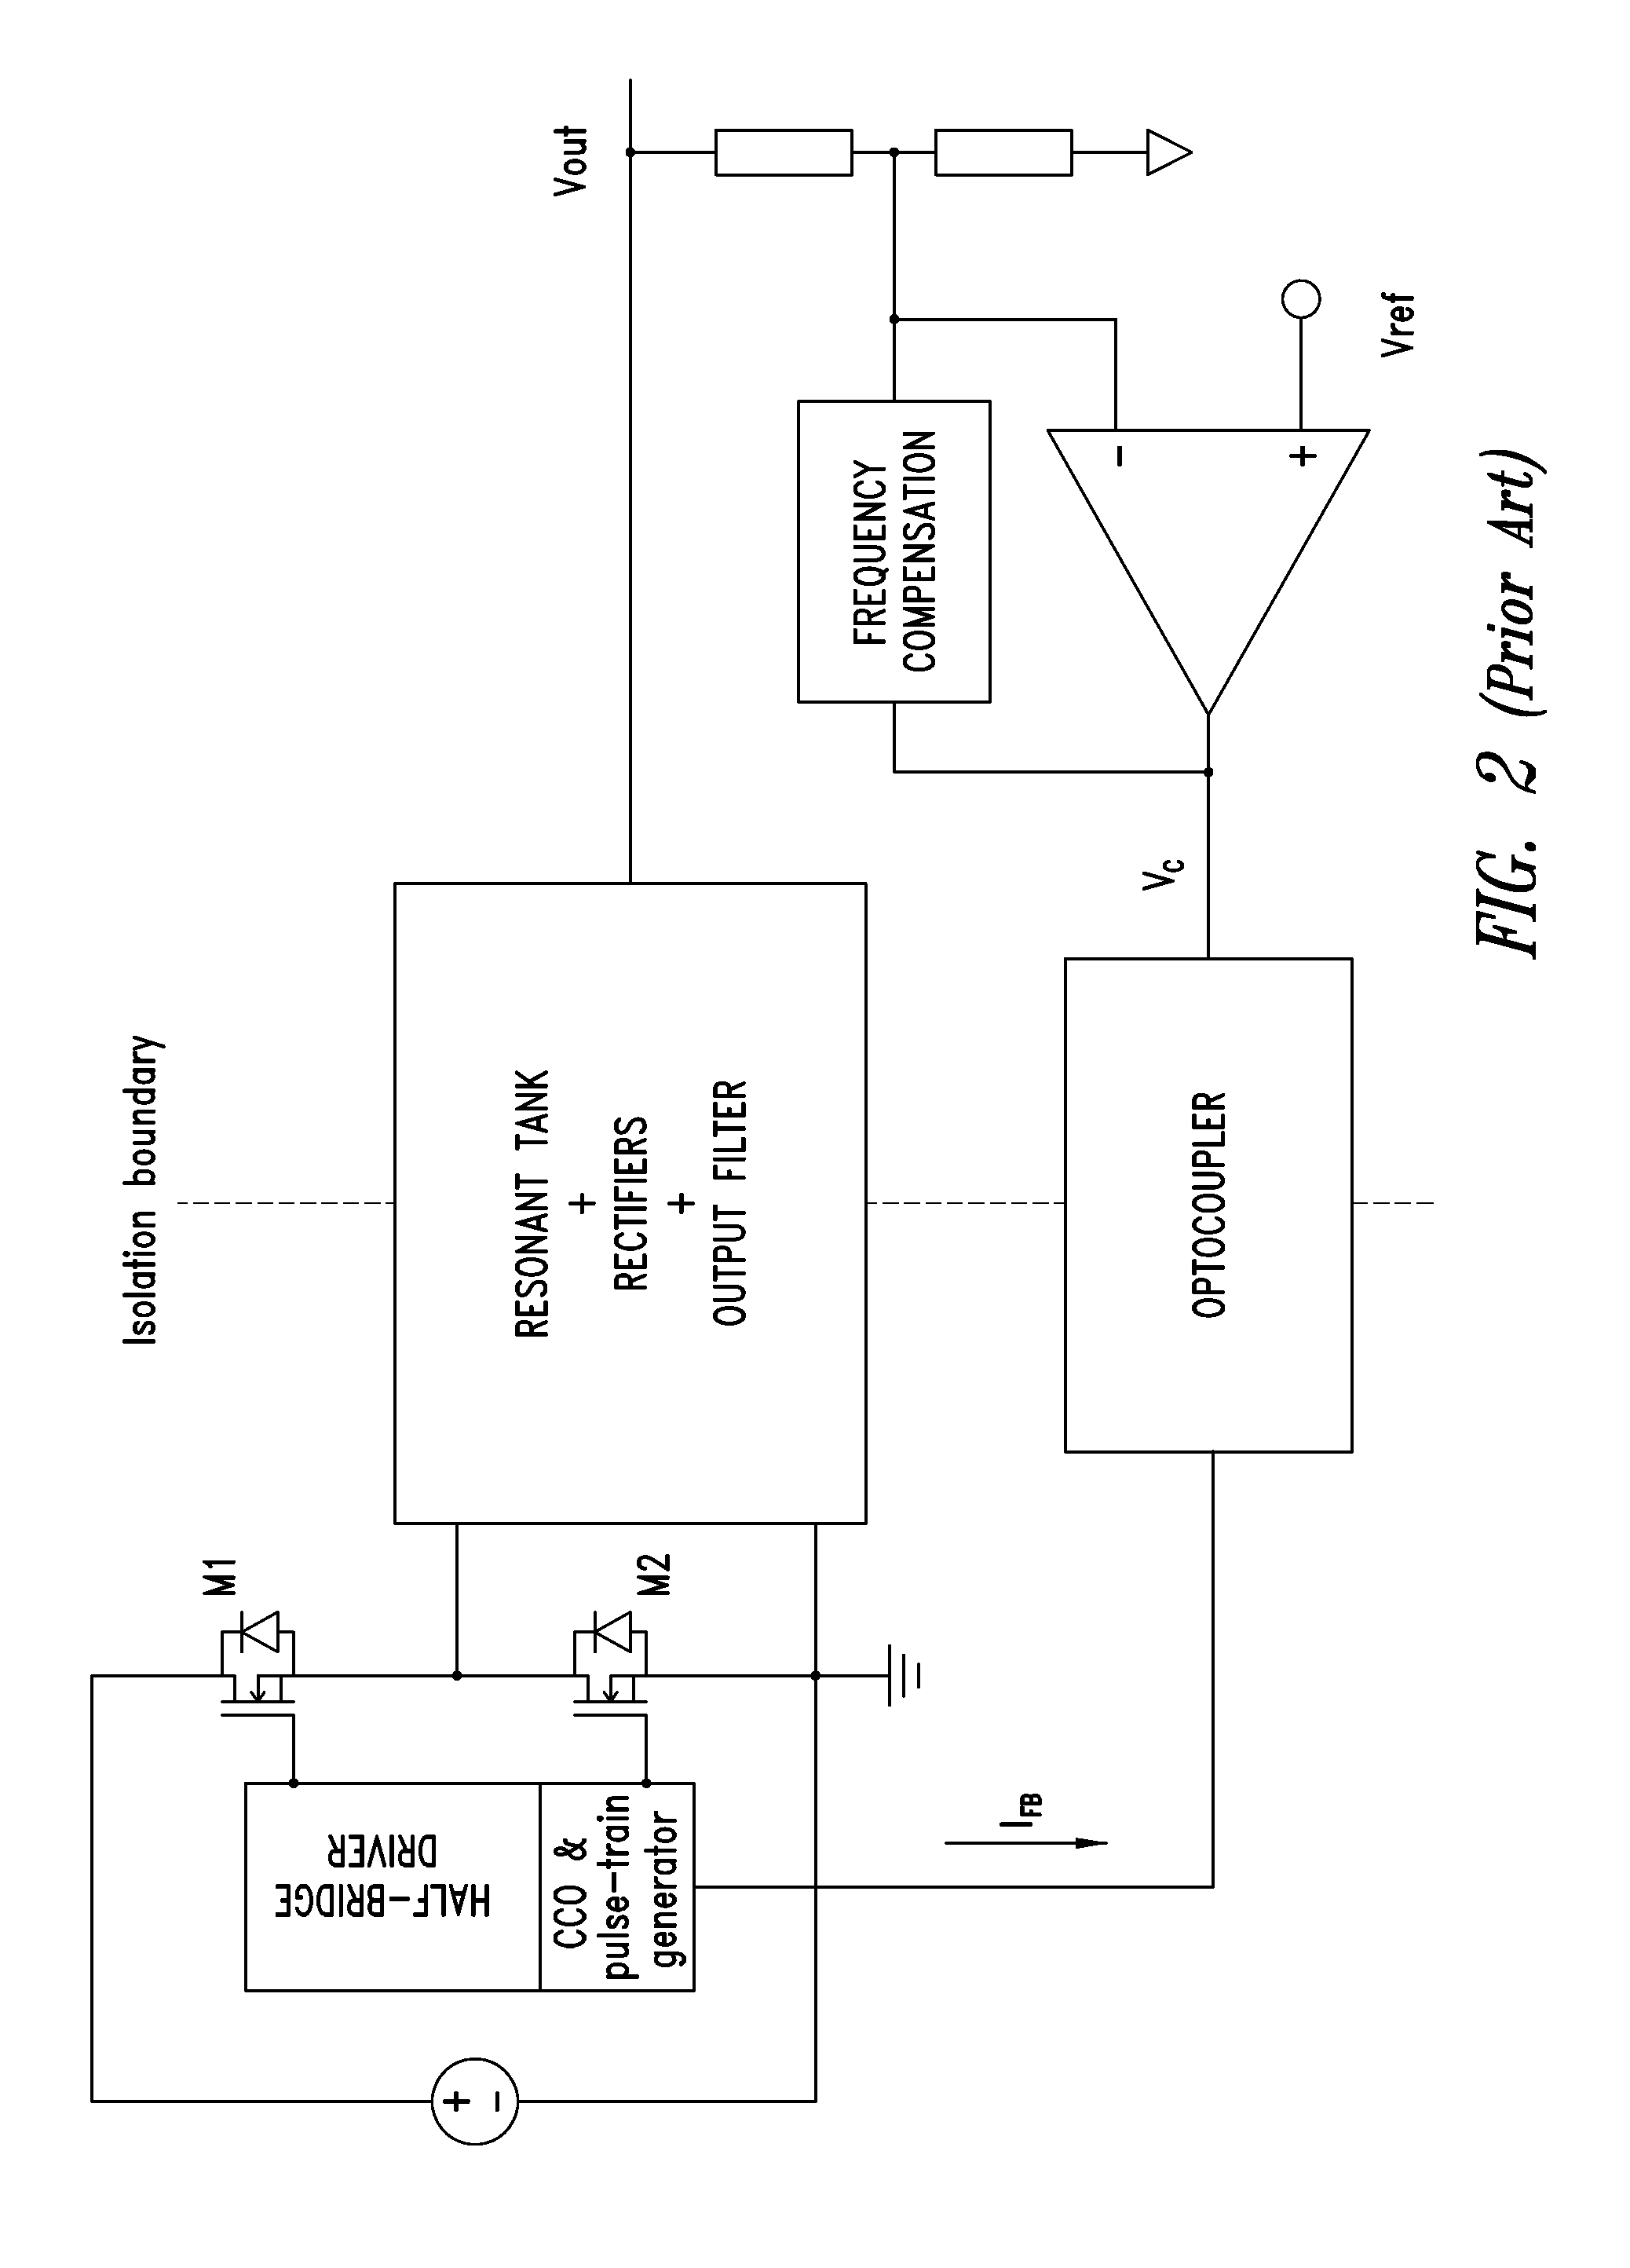 Burst-mode control method for low input power consumption in resonant converters and related control device